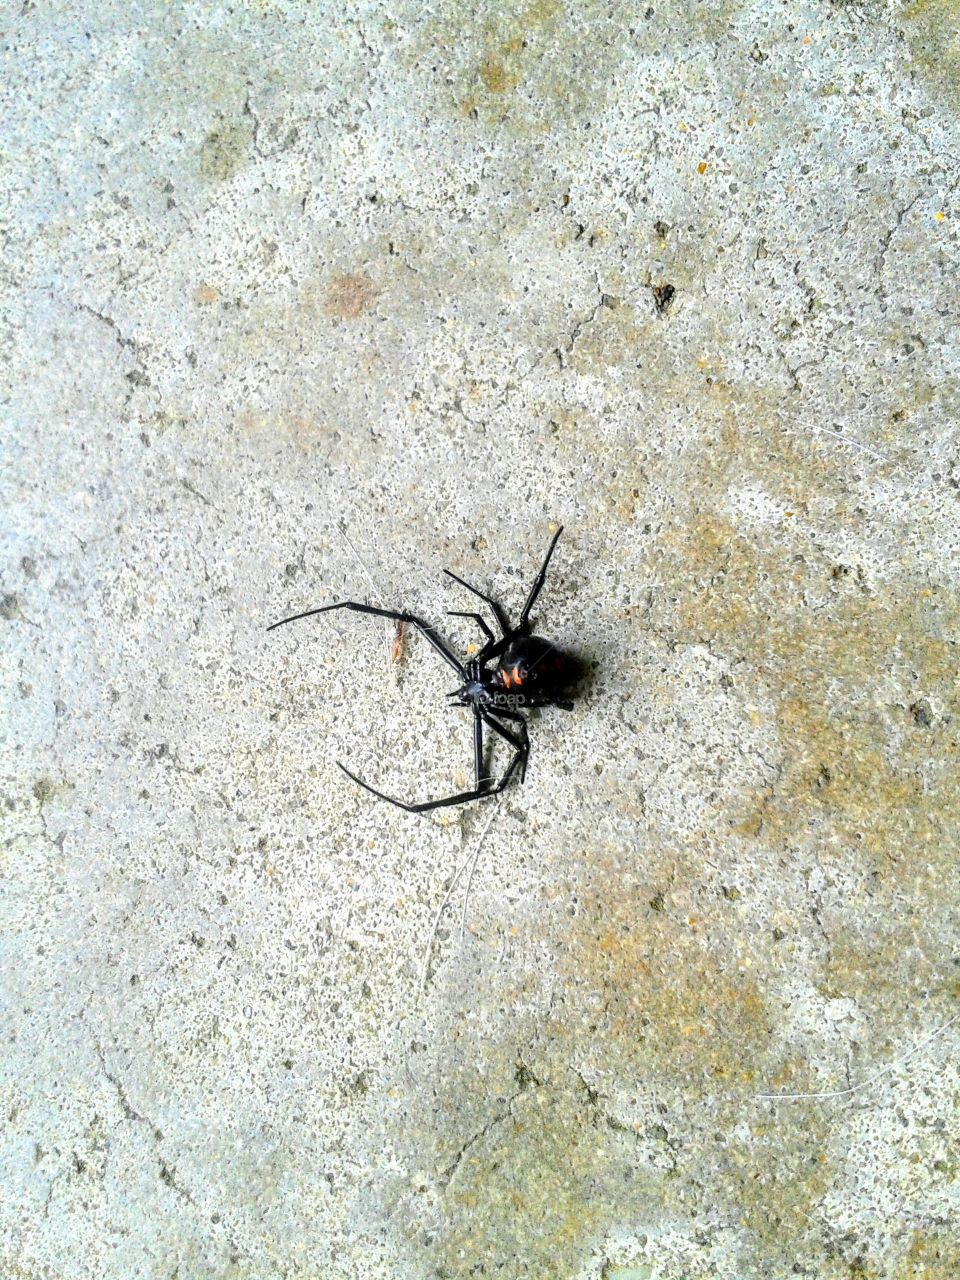 Black widow spider upside down exposing her belly on the concrete